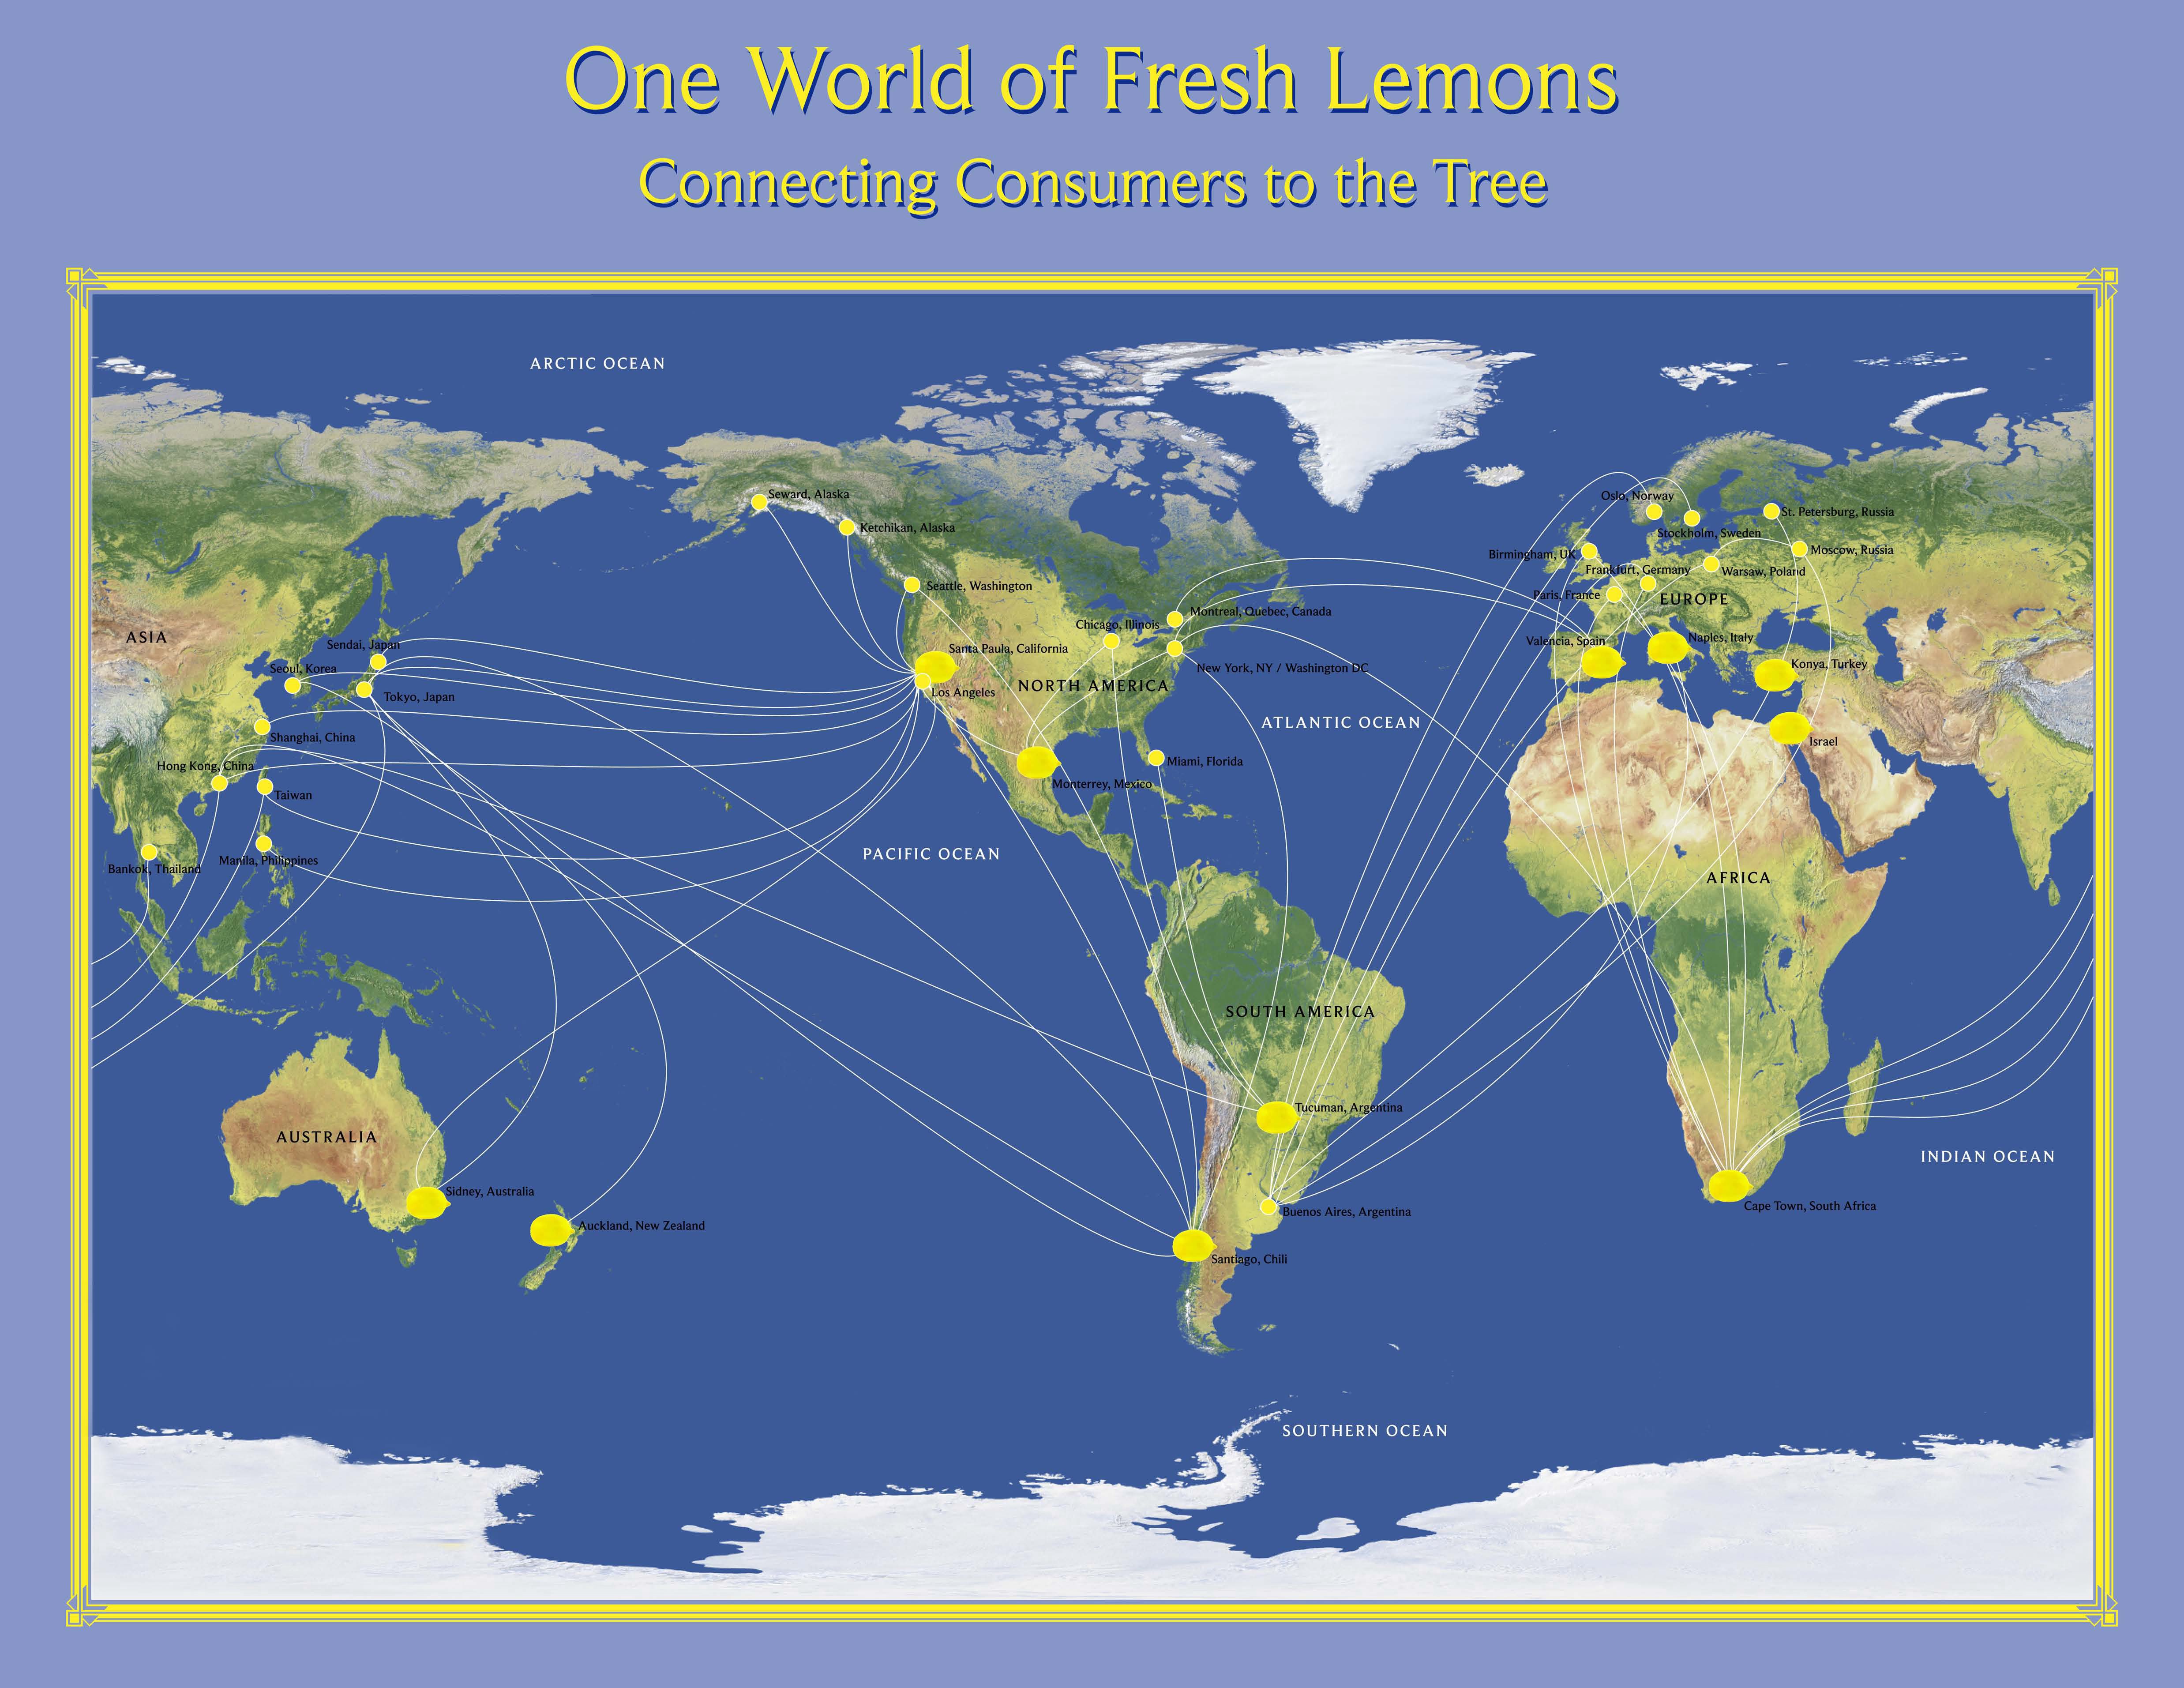  ONE WORLD OF FRESH LEMONS CONNECTING CONSUMERS TO THE TREE" AND "ARCTIC OCEAN, PACIFIC OCEAN, ATLANTIC OCEAN, SOUTHERN OCEAN, IN